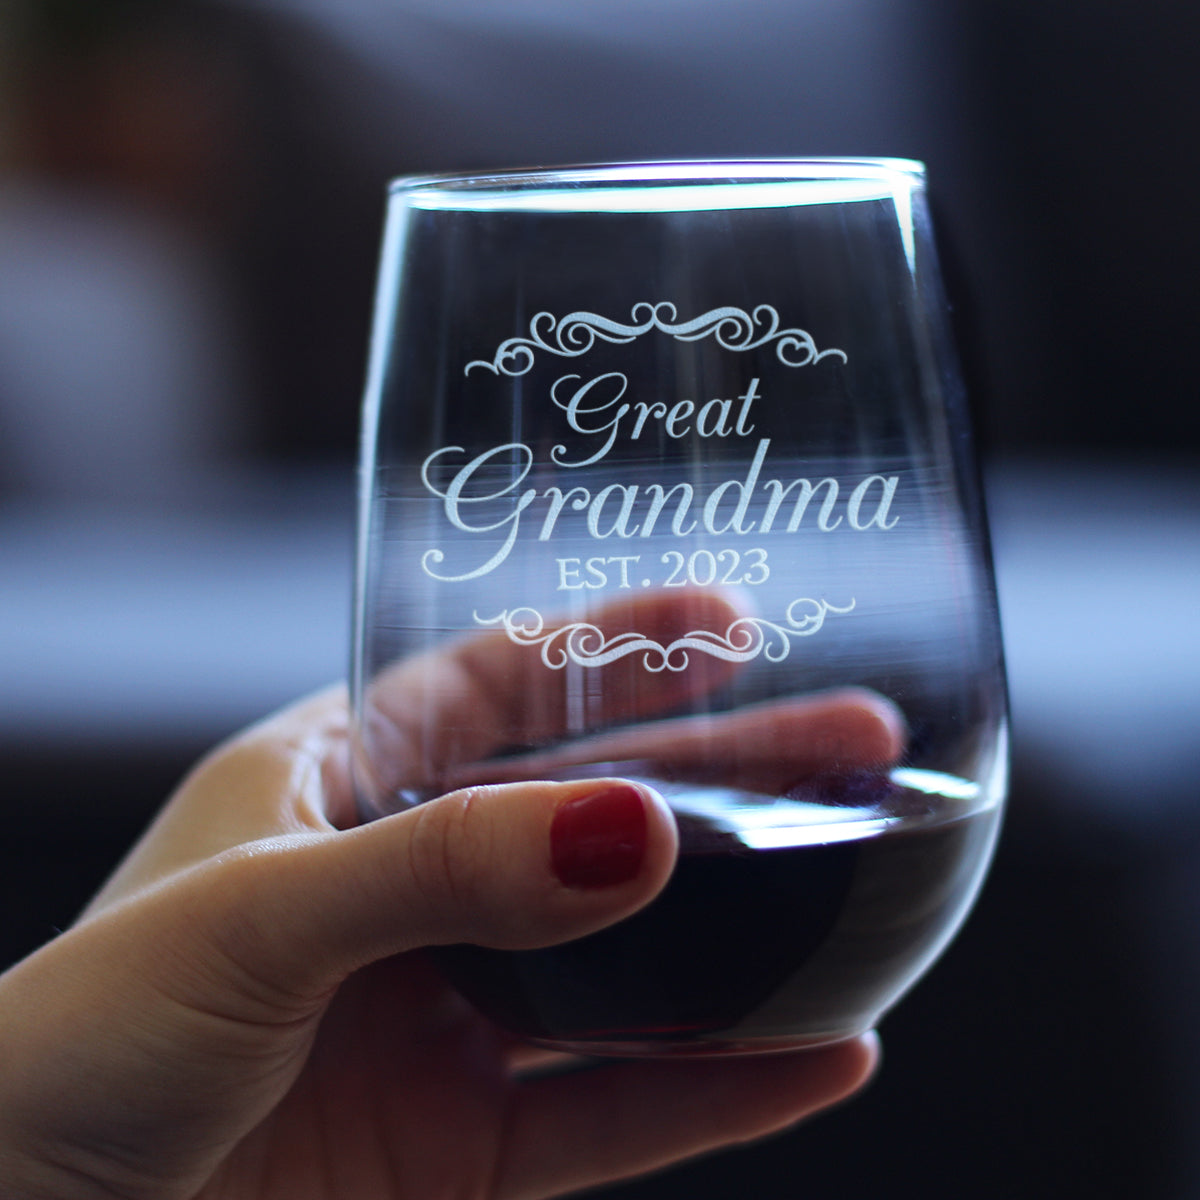 Great Grandma Est 2023 - New Great Grandmother Stemless Wine Glass Gift for First Time Great Grandparents - Decorative 17 Oz Large Glasses